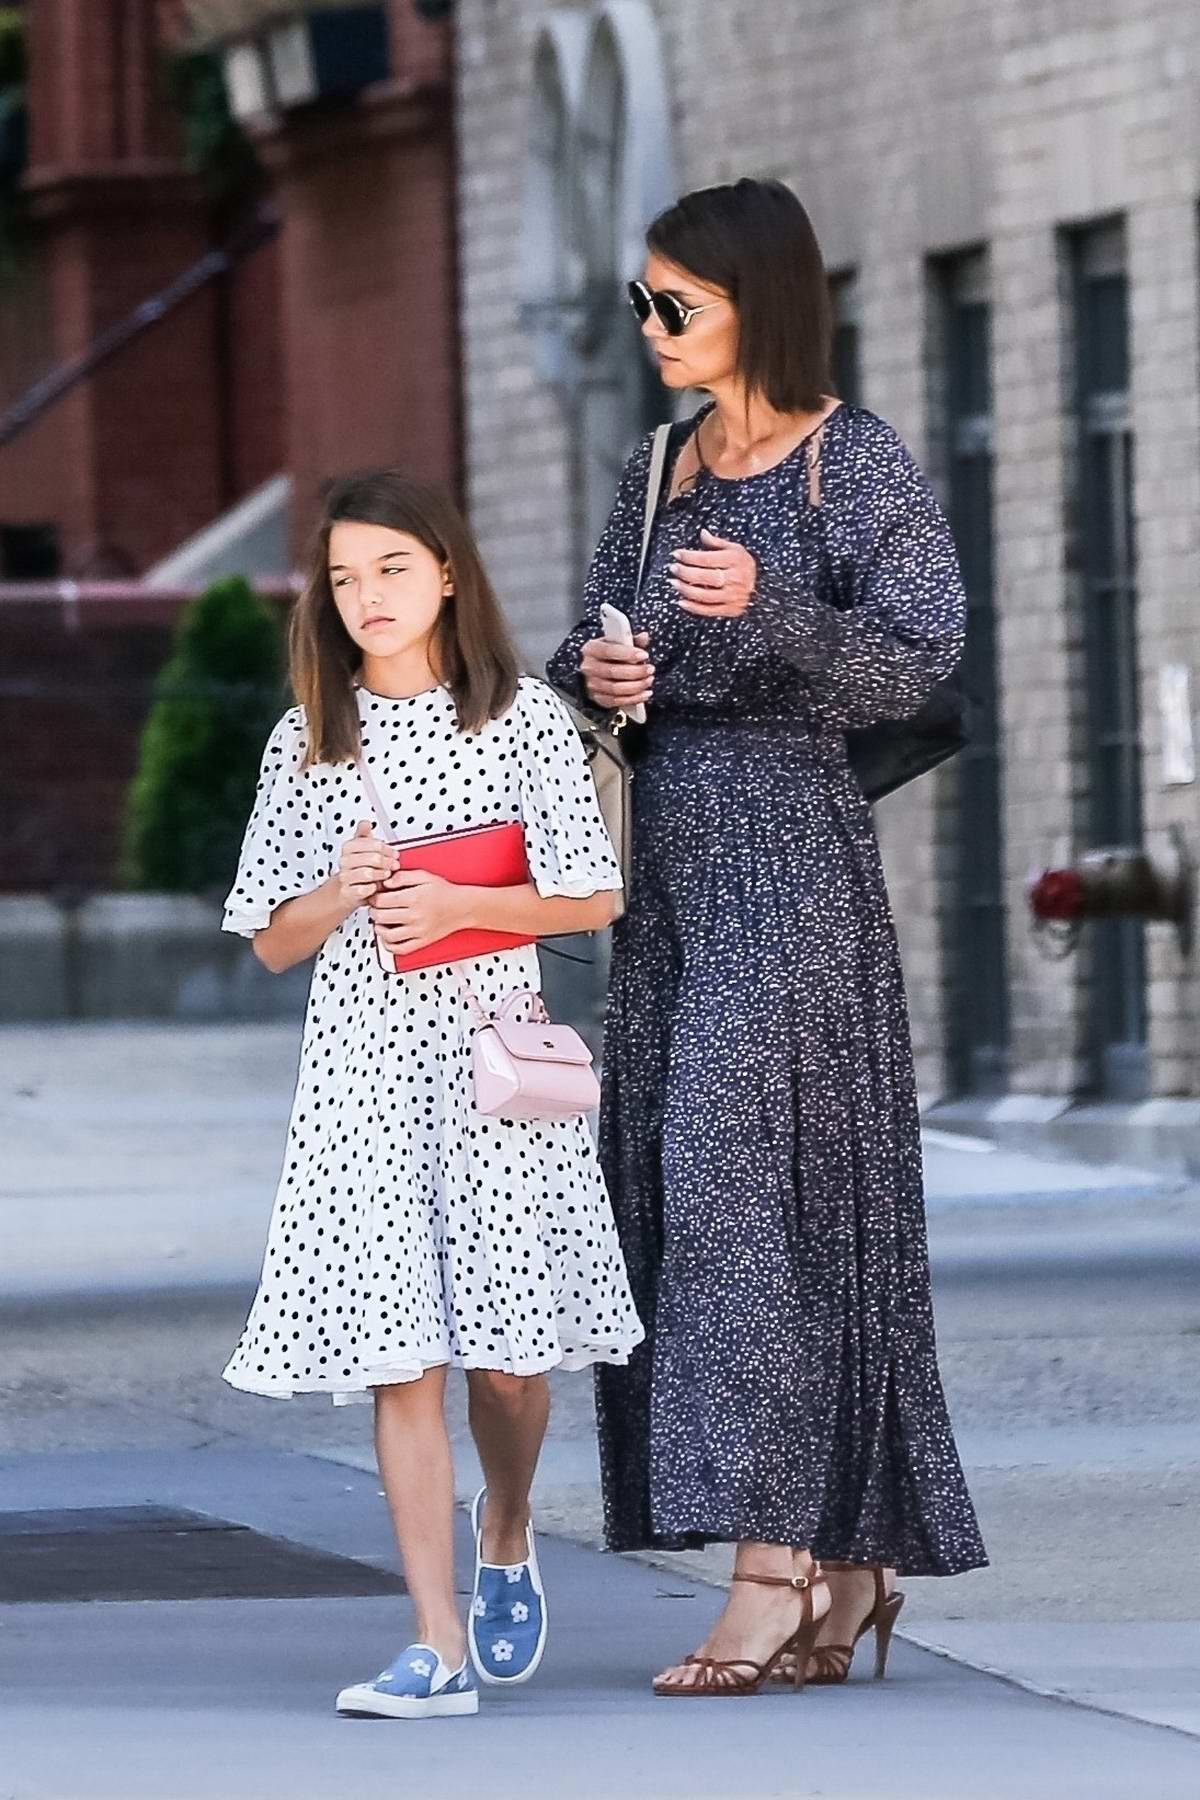 Katie Holmes And Daughter Suri Cruise Take A Walk After Breakfast In Soho New York City 300818 4